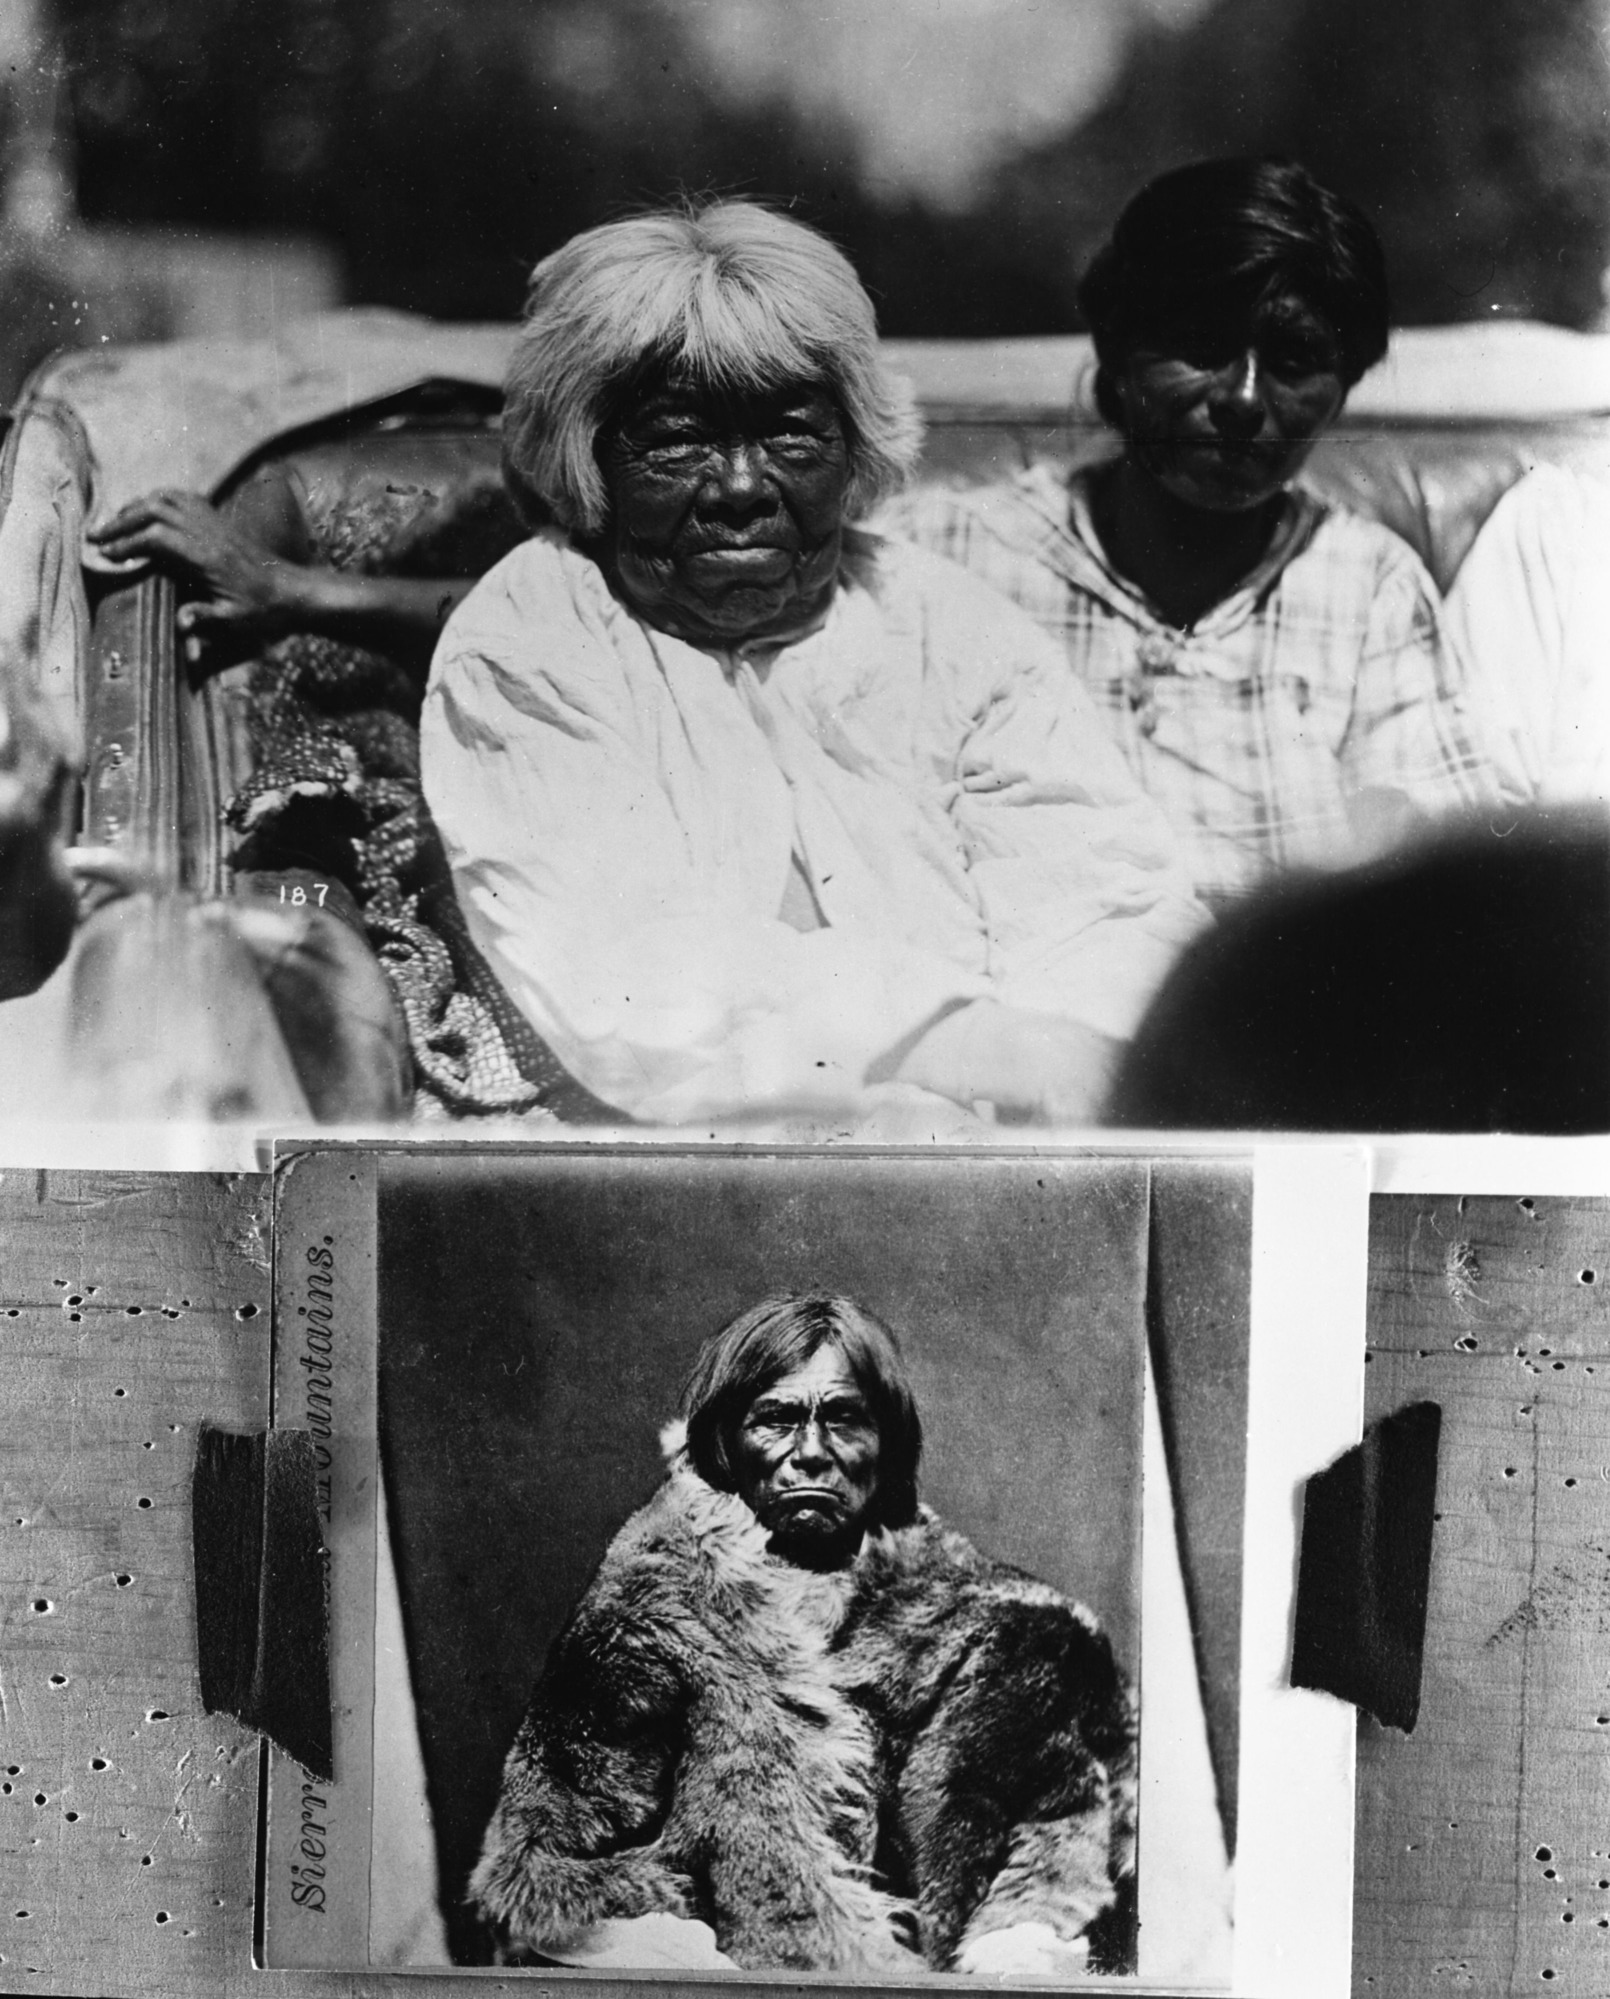 Copy Neg: April 1941 by Ralph H. Anderson. Top print is Lucy & Lena Brown; bottom print unidentified. Originally titled: "Early day types of Yosemite Indians."